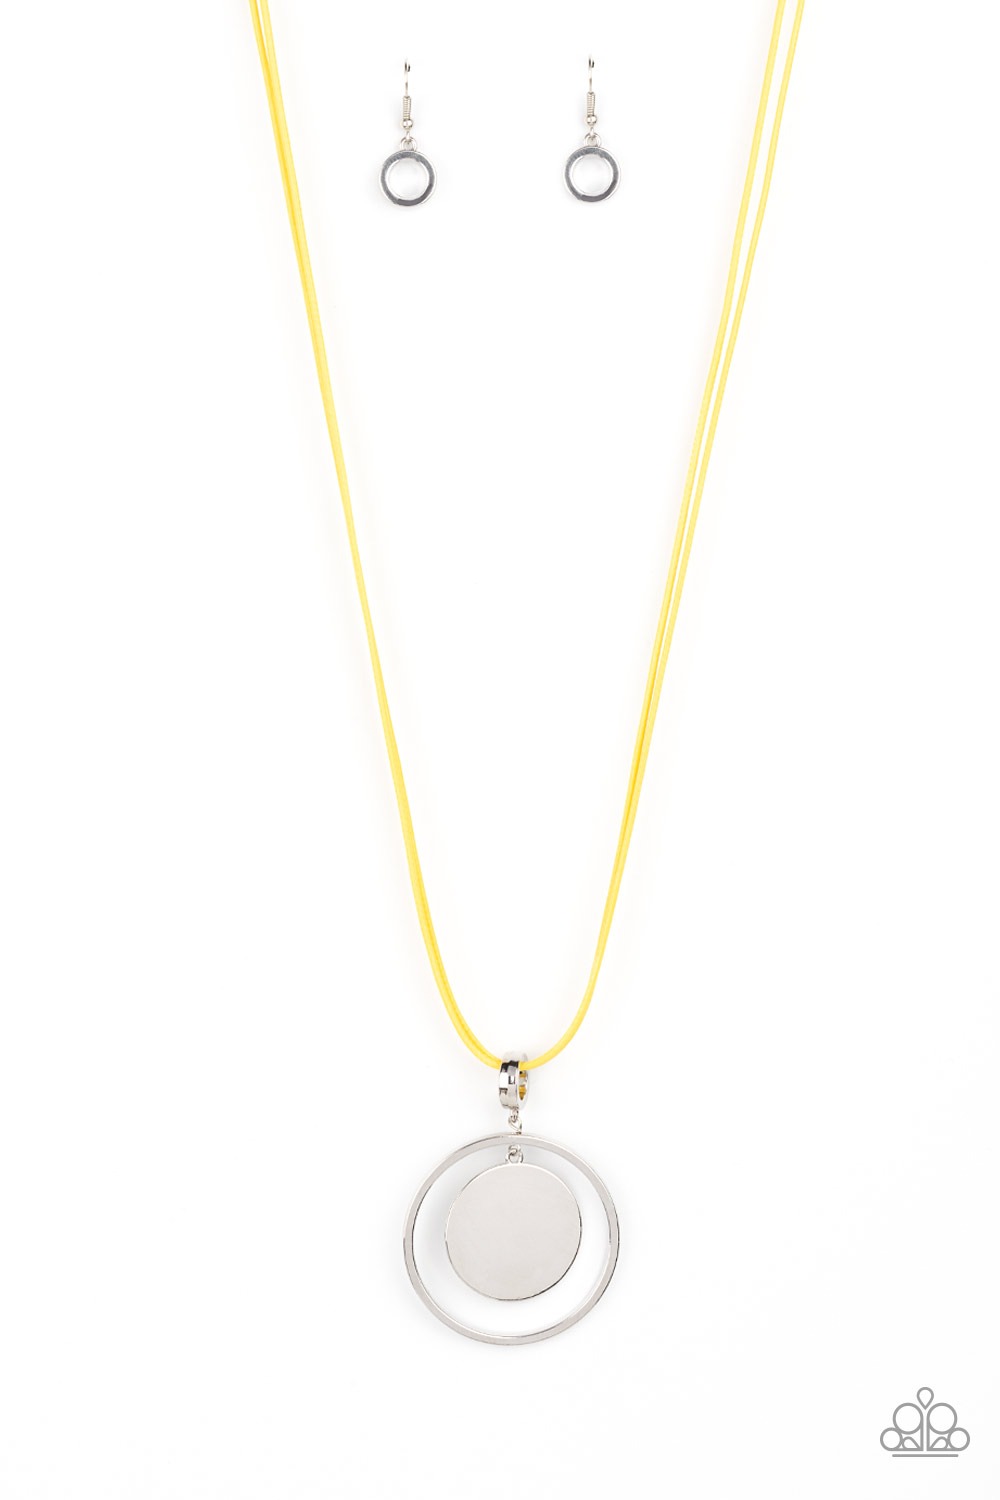 Necklace - Rural Reflection - Yellow